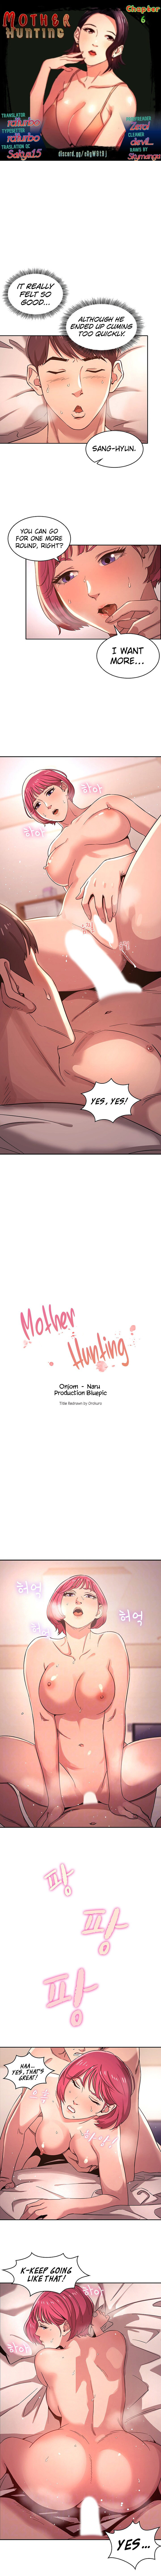 Mother Hunting - Chapter 6 Page 1